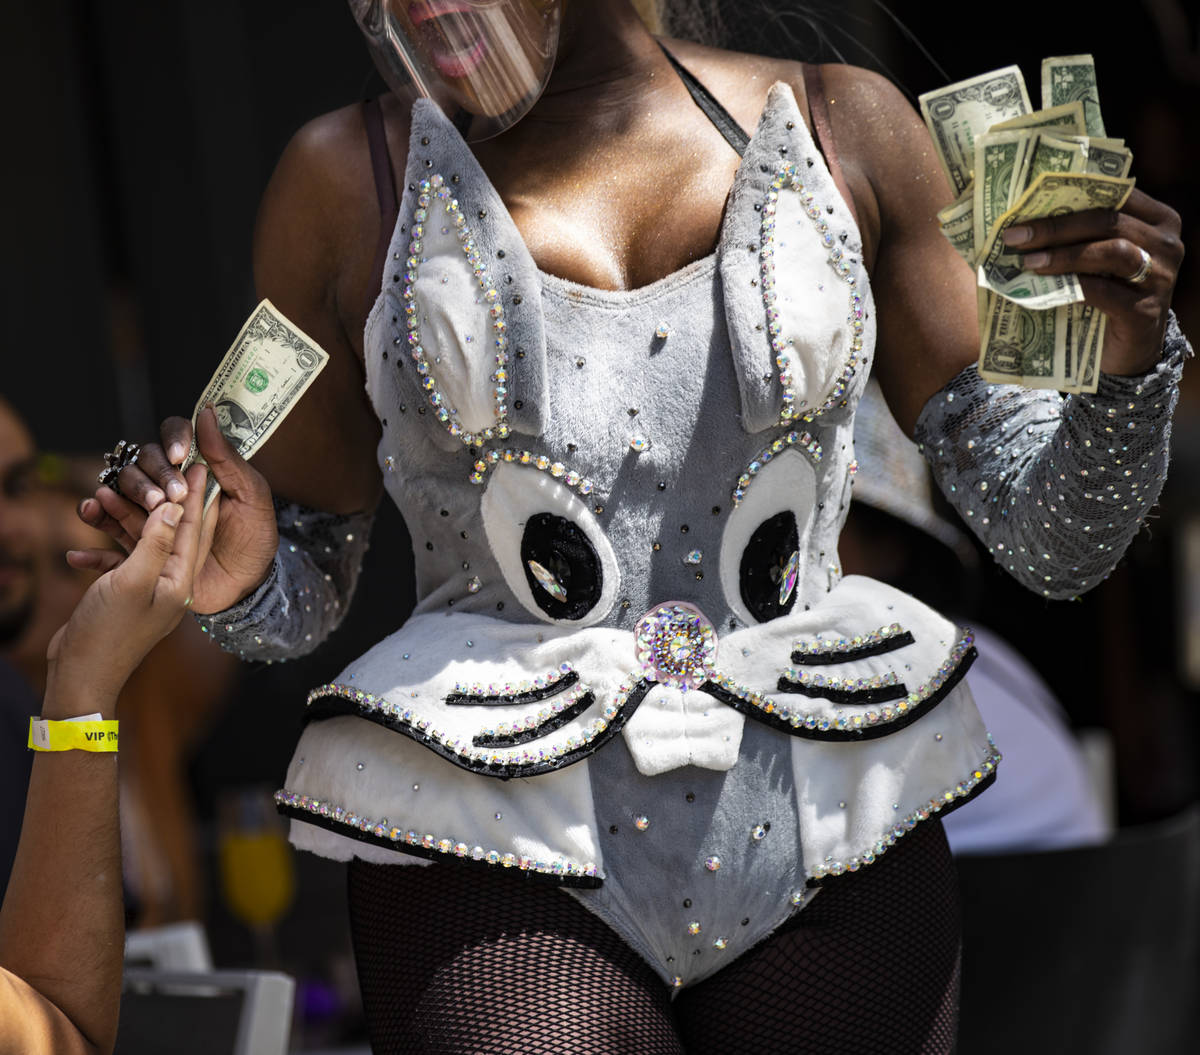 Drag queen Coco Montrese performs during the "Bottomless Drag Brunch" show at The Gar ...